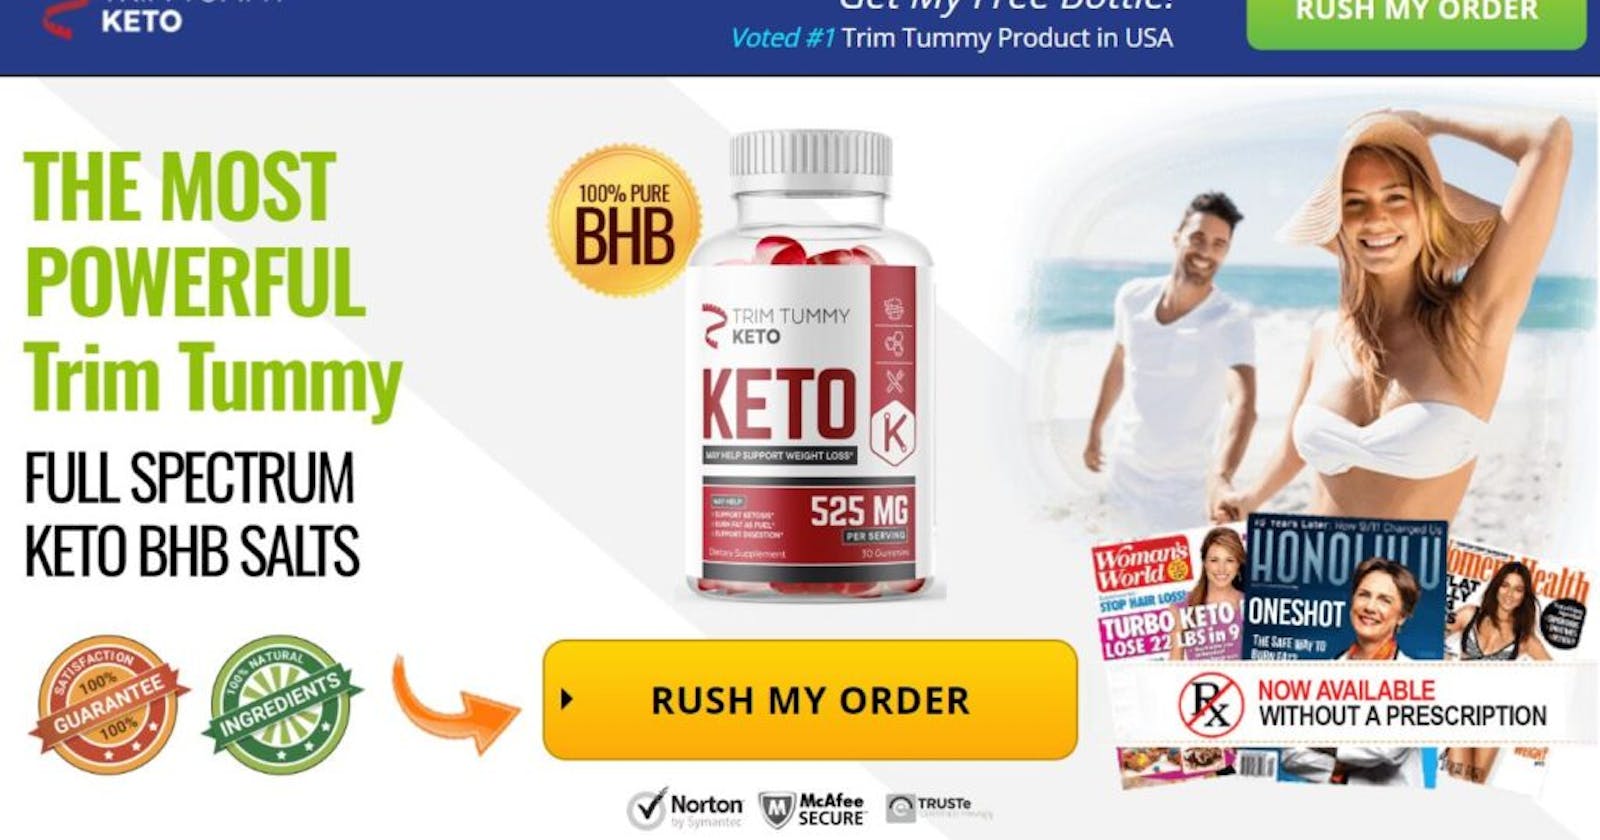 Trim Tummy Keto Gummies Reviews: Should You Buy Weight Loss Supplements? Check Ingredients, Side Effects, and Price!